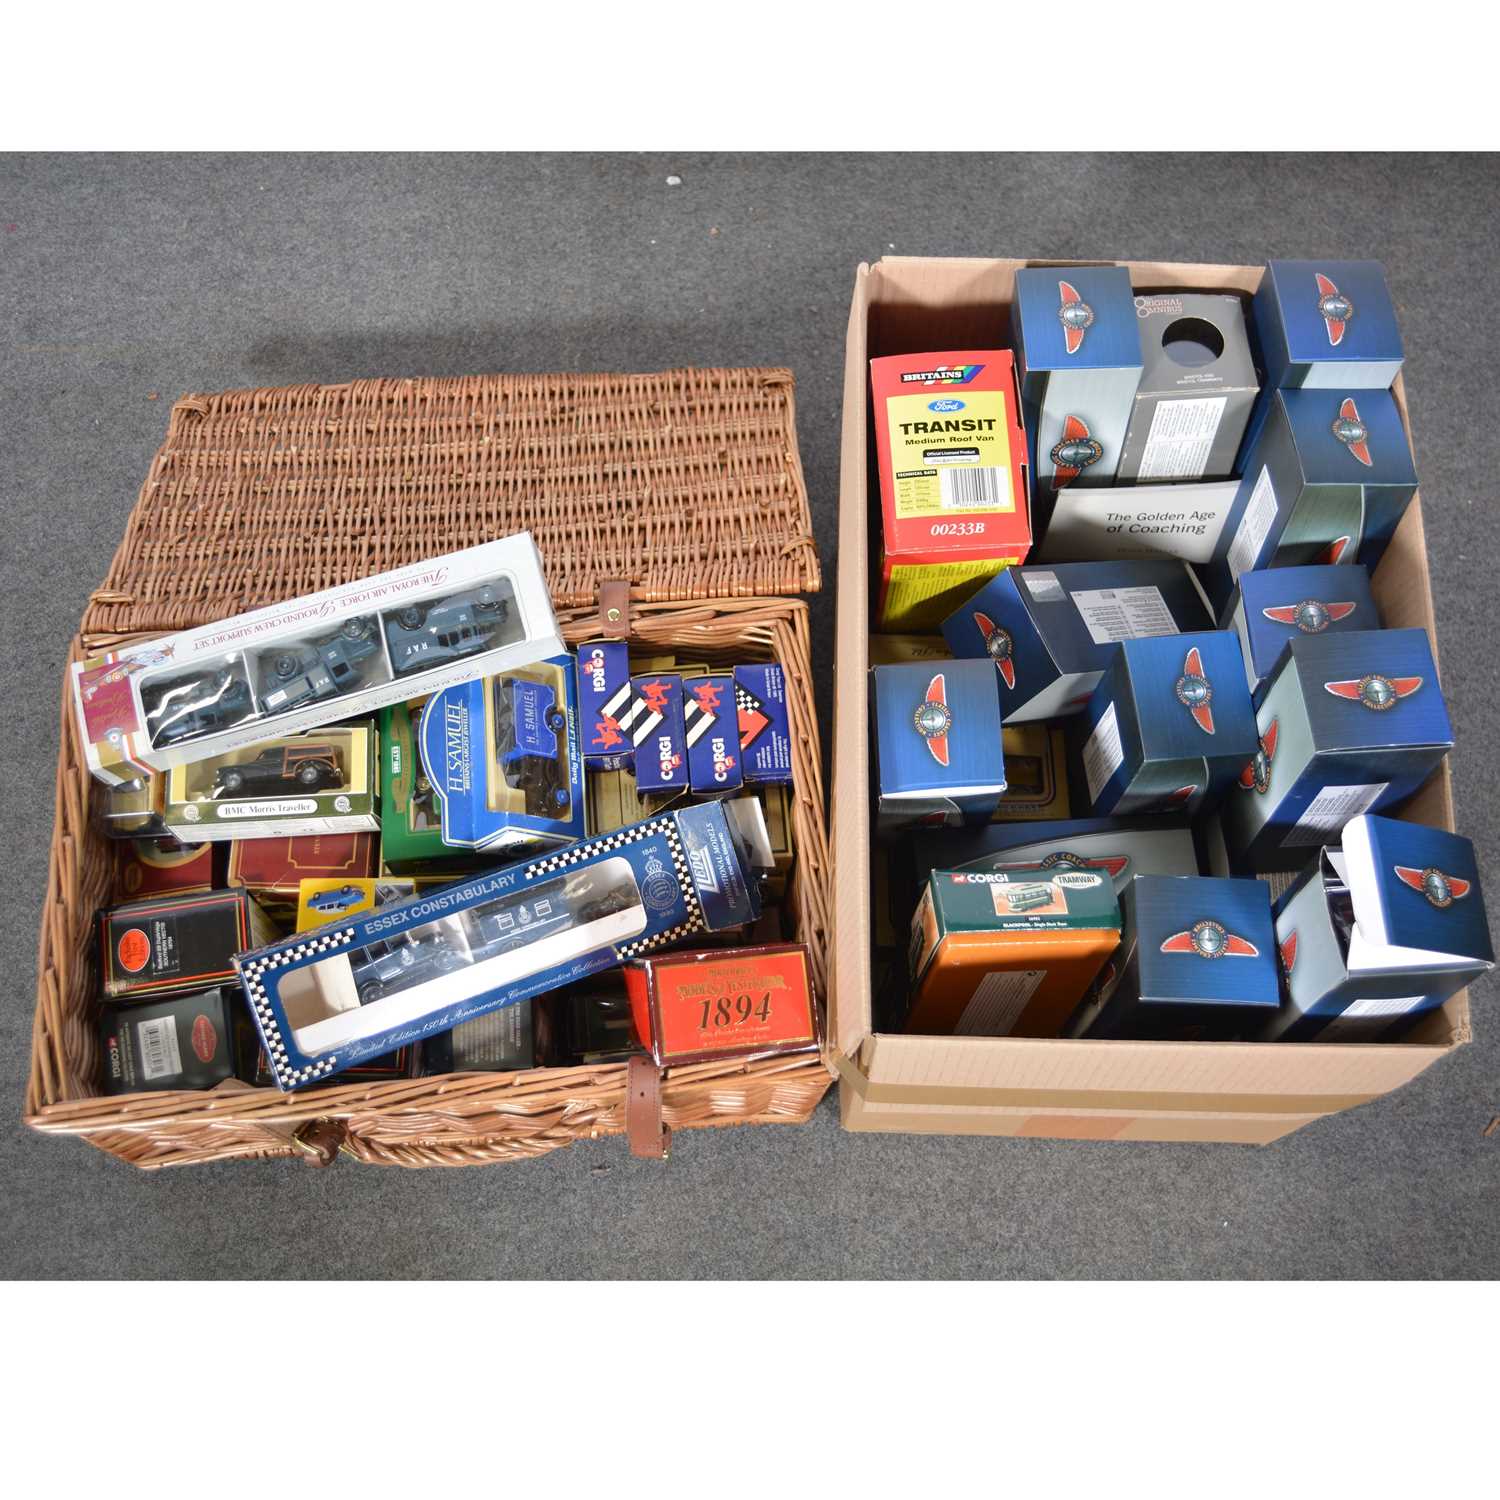 Lot 149 - Collection of Die-cast models, including Matchbox, Vanguard, Corgi, Britains and others.